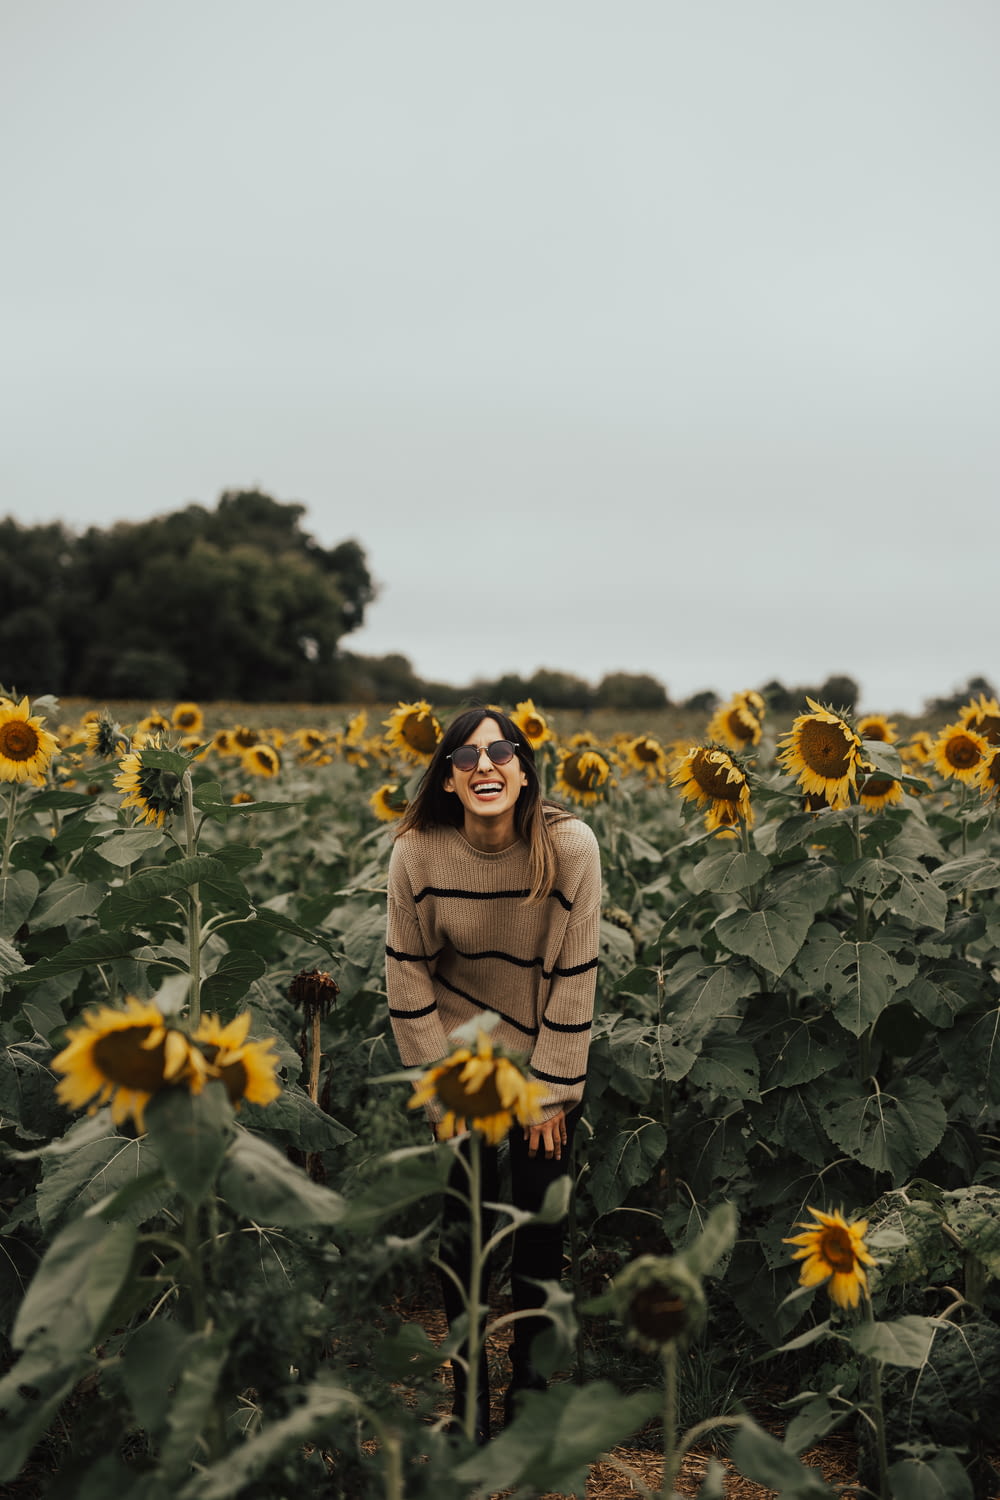 man in black and brown striped sweater standing near sunflower field